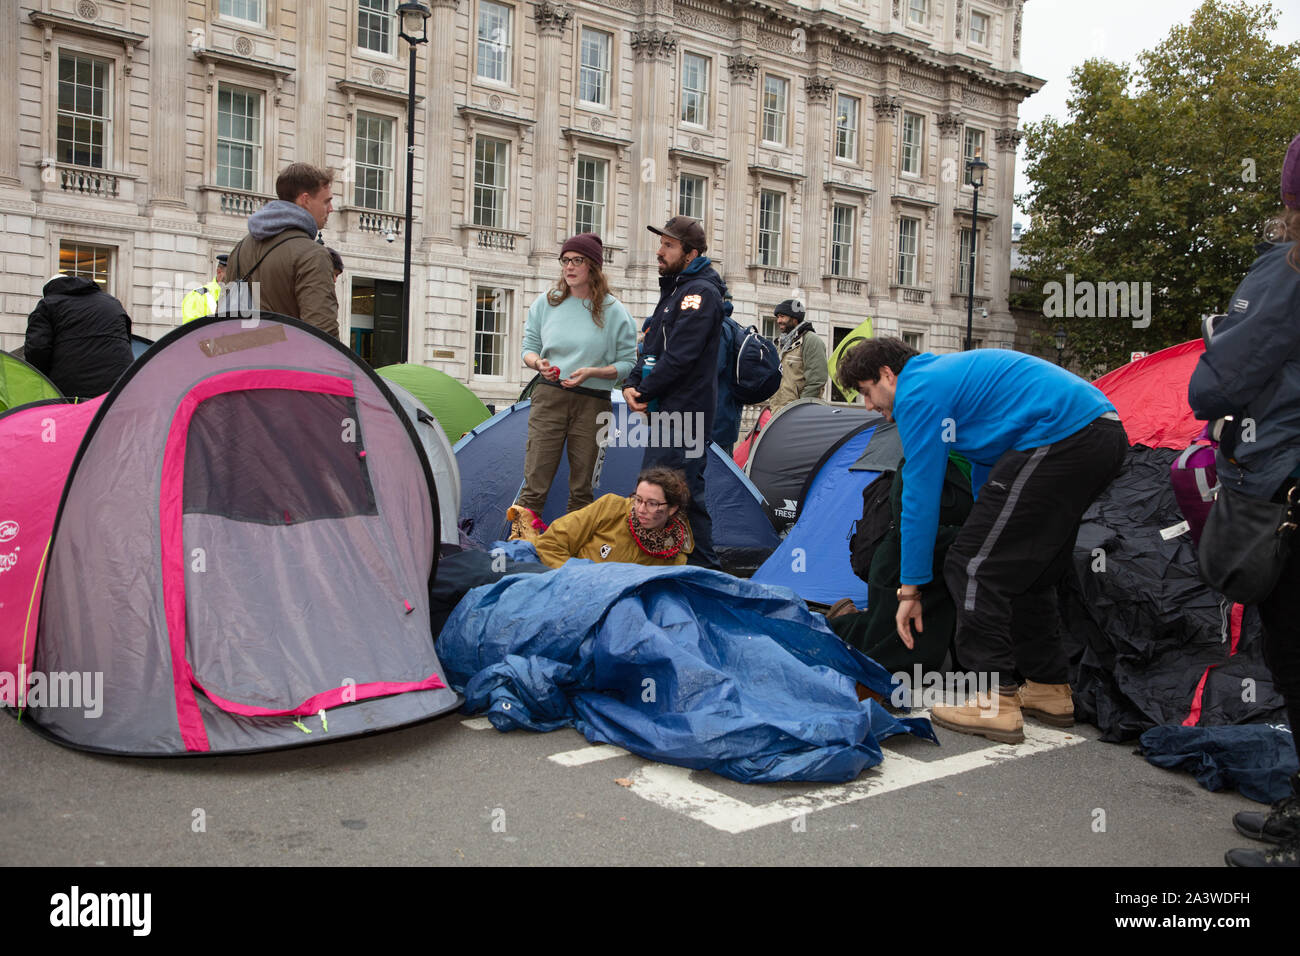 London, UK. 9th October 2019. Demonstrators seen near Downing Street in the early morning, during the Extinction Rebellion two week long protest in London. Credit: Joe Kuis / Alamy News Stock Photo